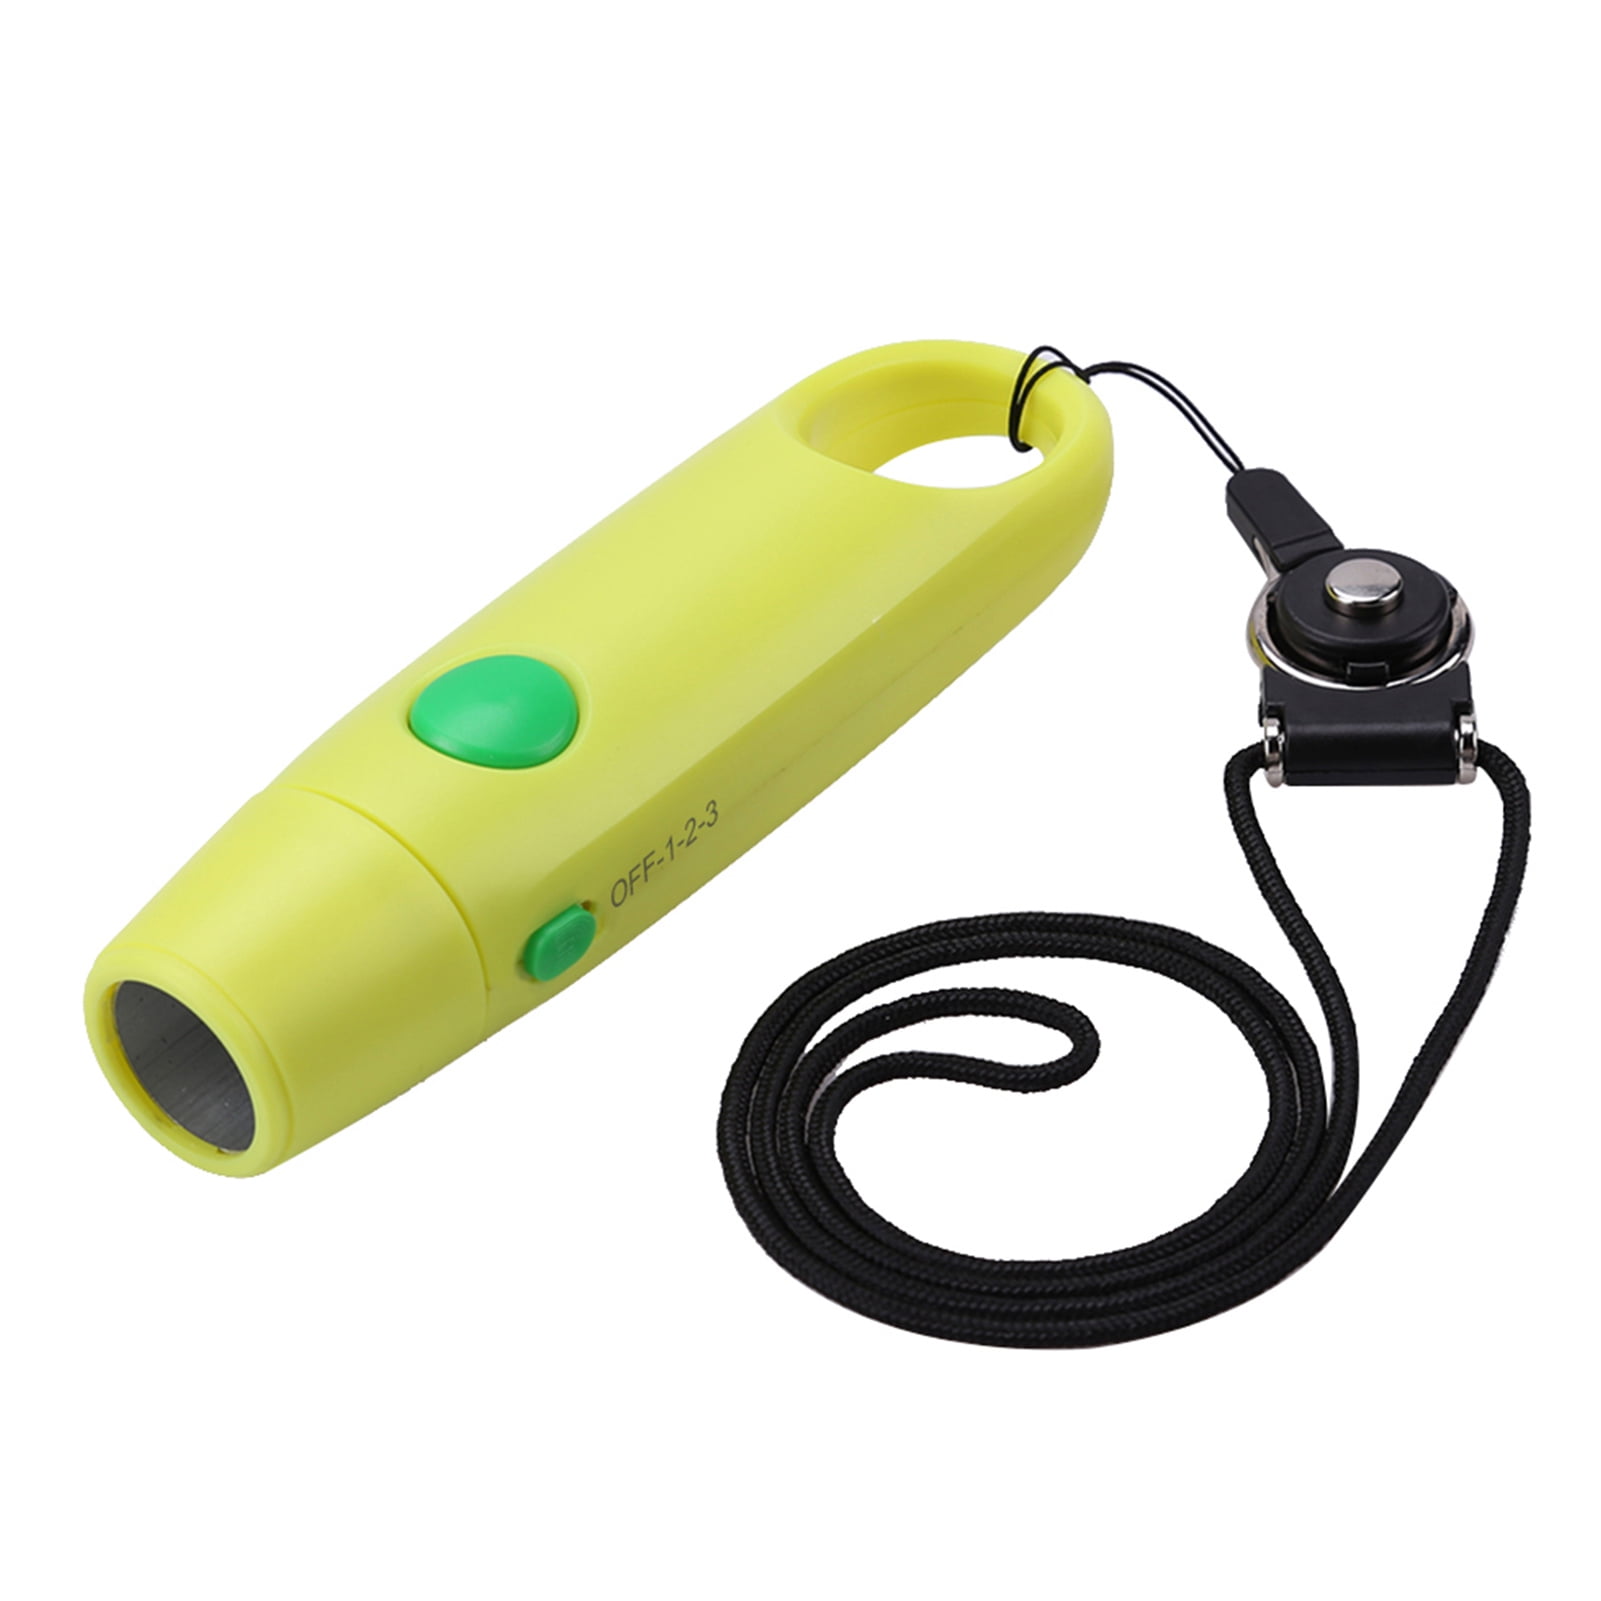 Handheld Design Loud Voice Electronic Whistle with Lanyard Multipurpose for Football Basketball Referee Cheerleading Outdoor Survival Yellow 